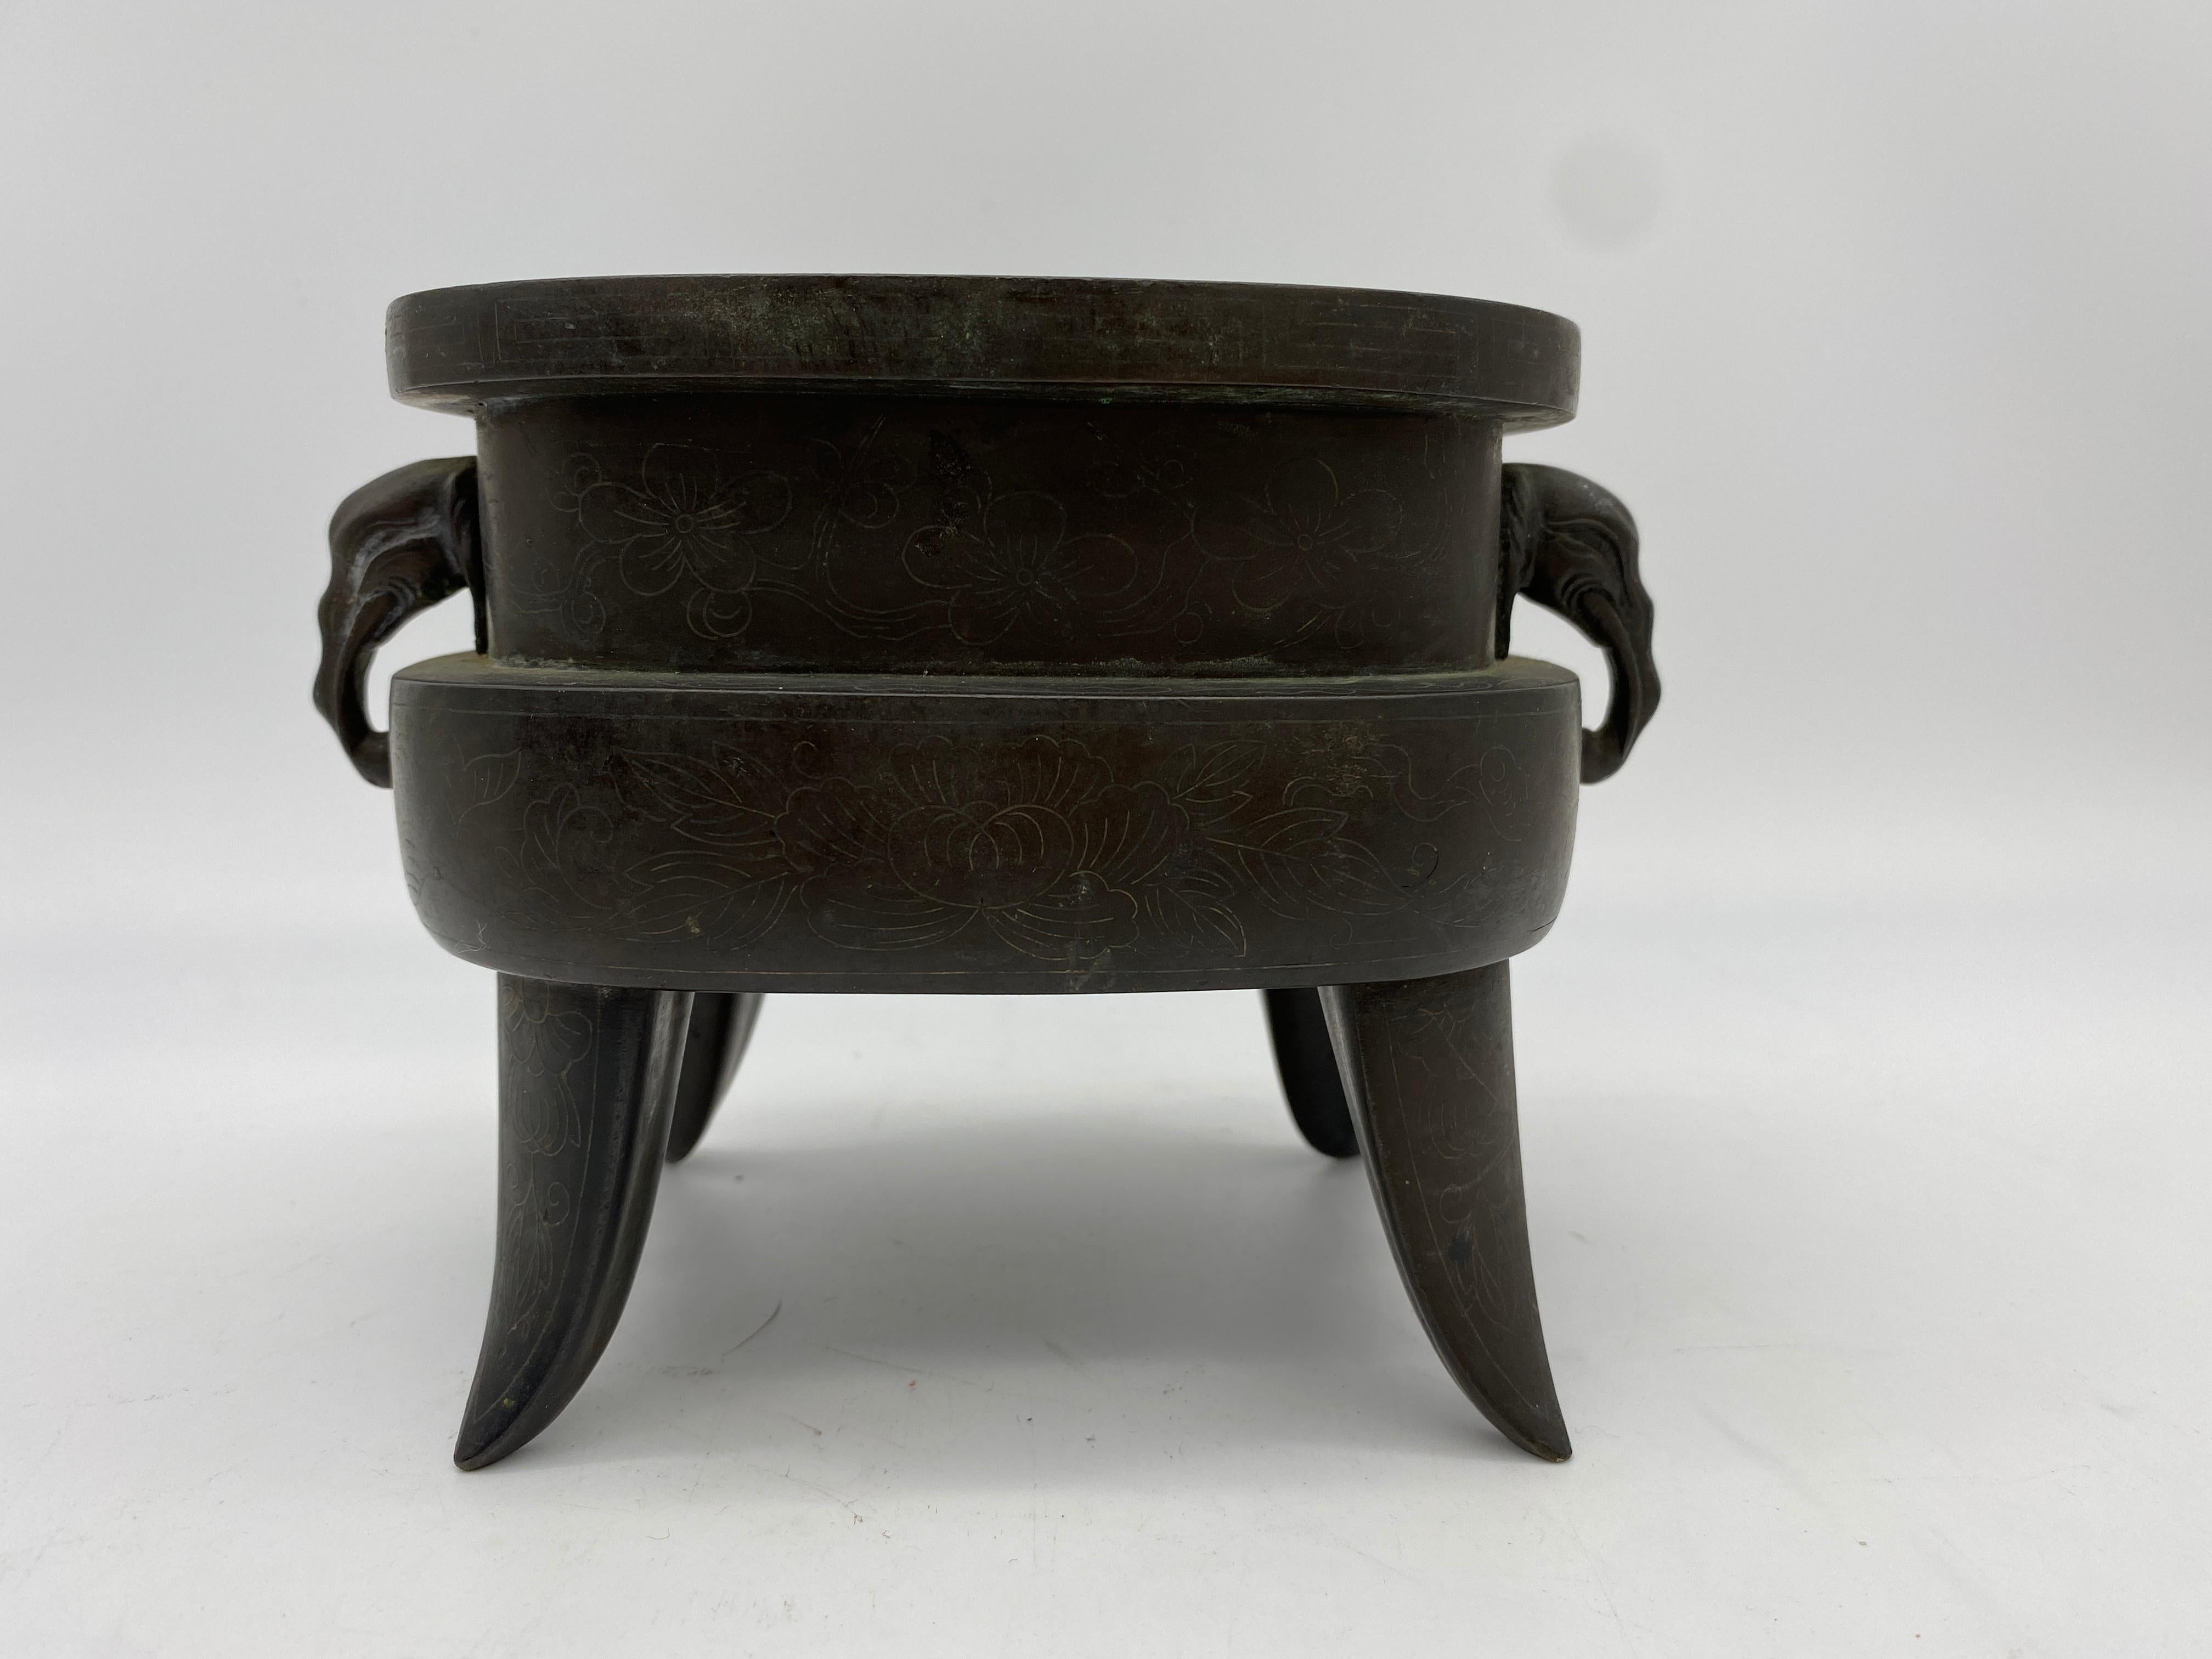 Antique Qing Dynasty Chinese Twin Handled Bronze Censer with Elephants Handles For Sale 5